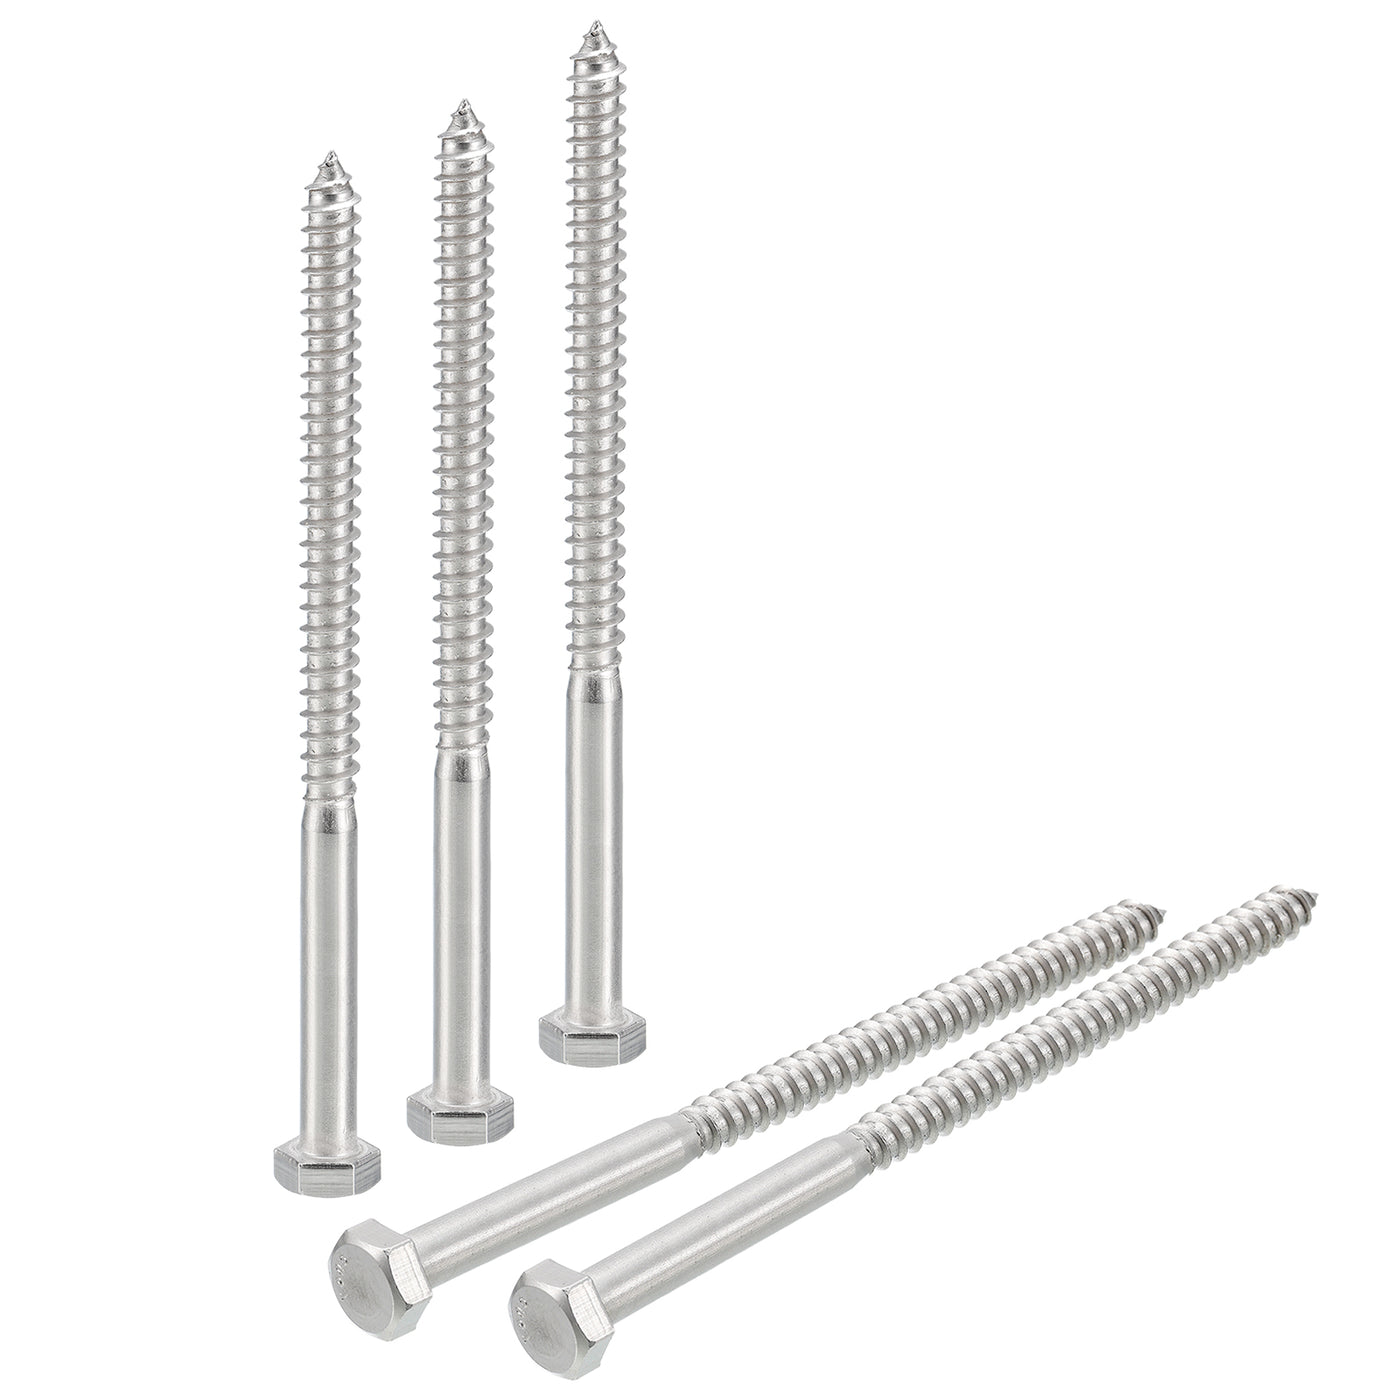 uxcell Uxcell Hex Head Lag Screws Bolts, 10pcs 5/16" x 5" 304 Stainless Steel Wood Screws